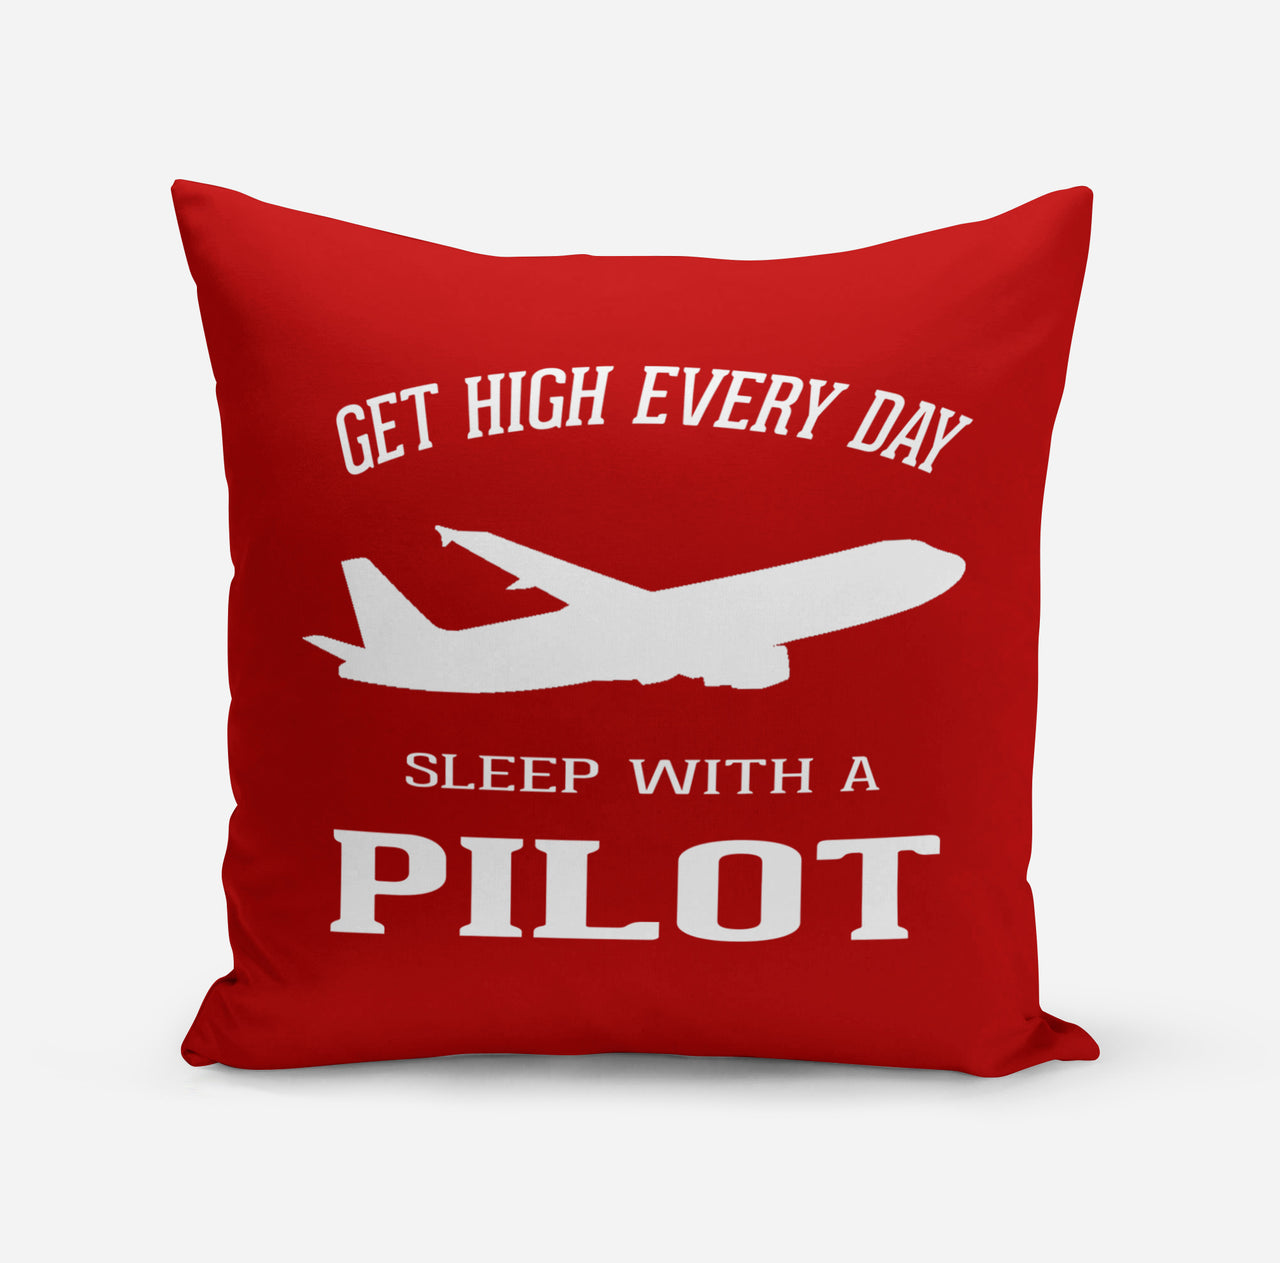 Get High Every Day Sleep With A Pilot Designed Pillows